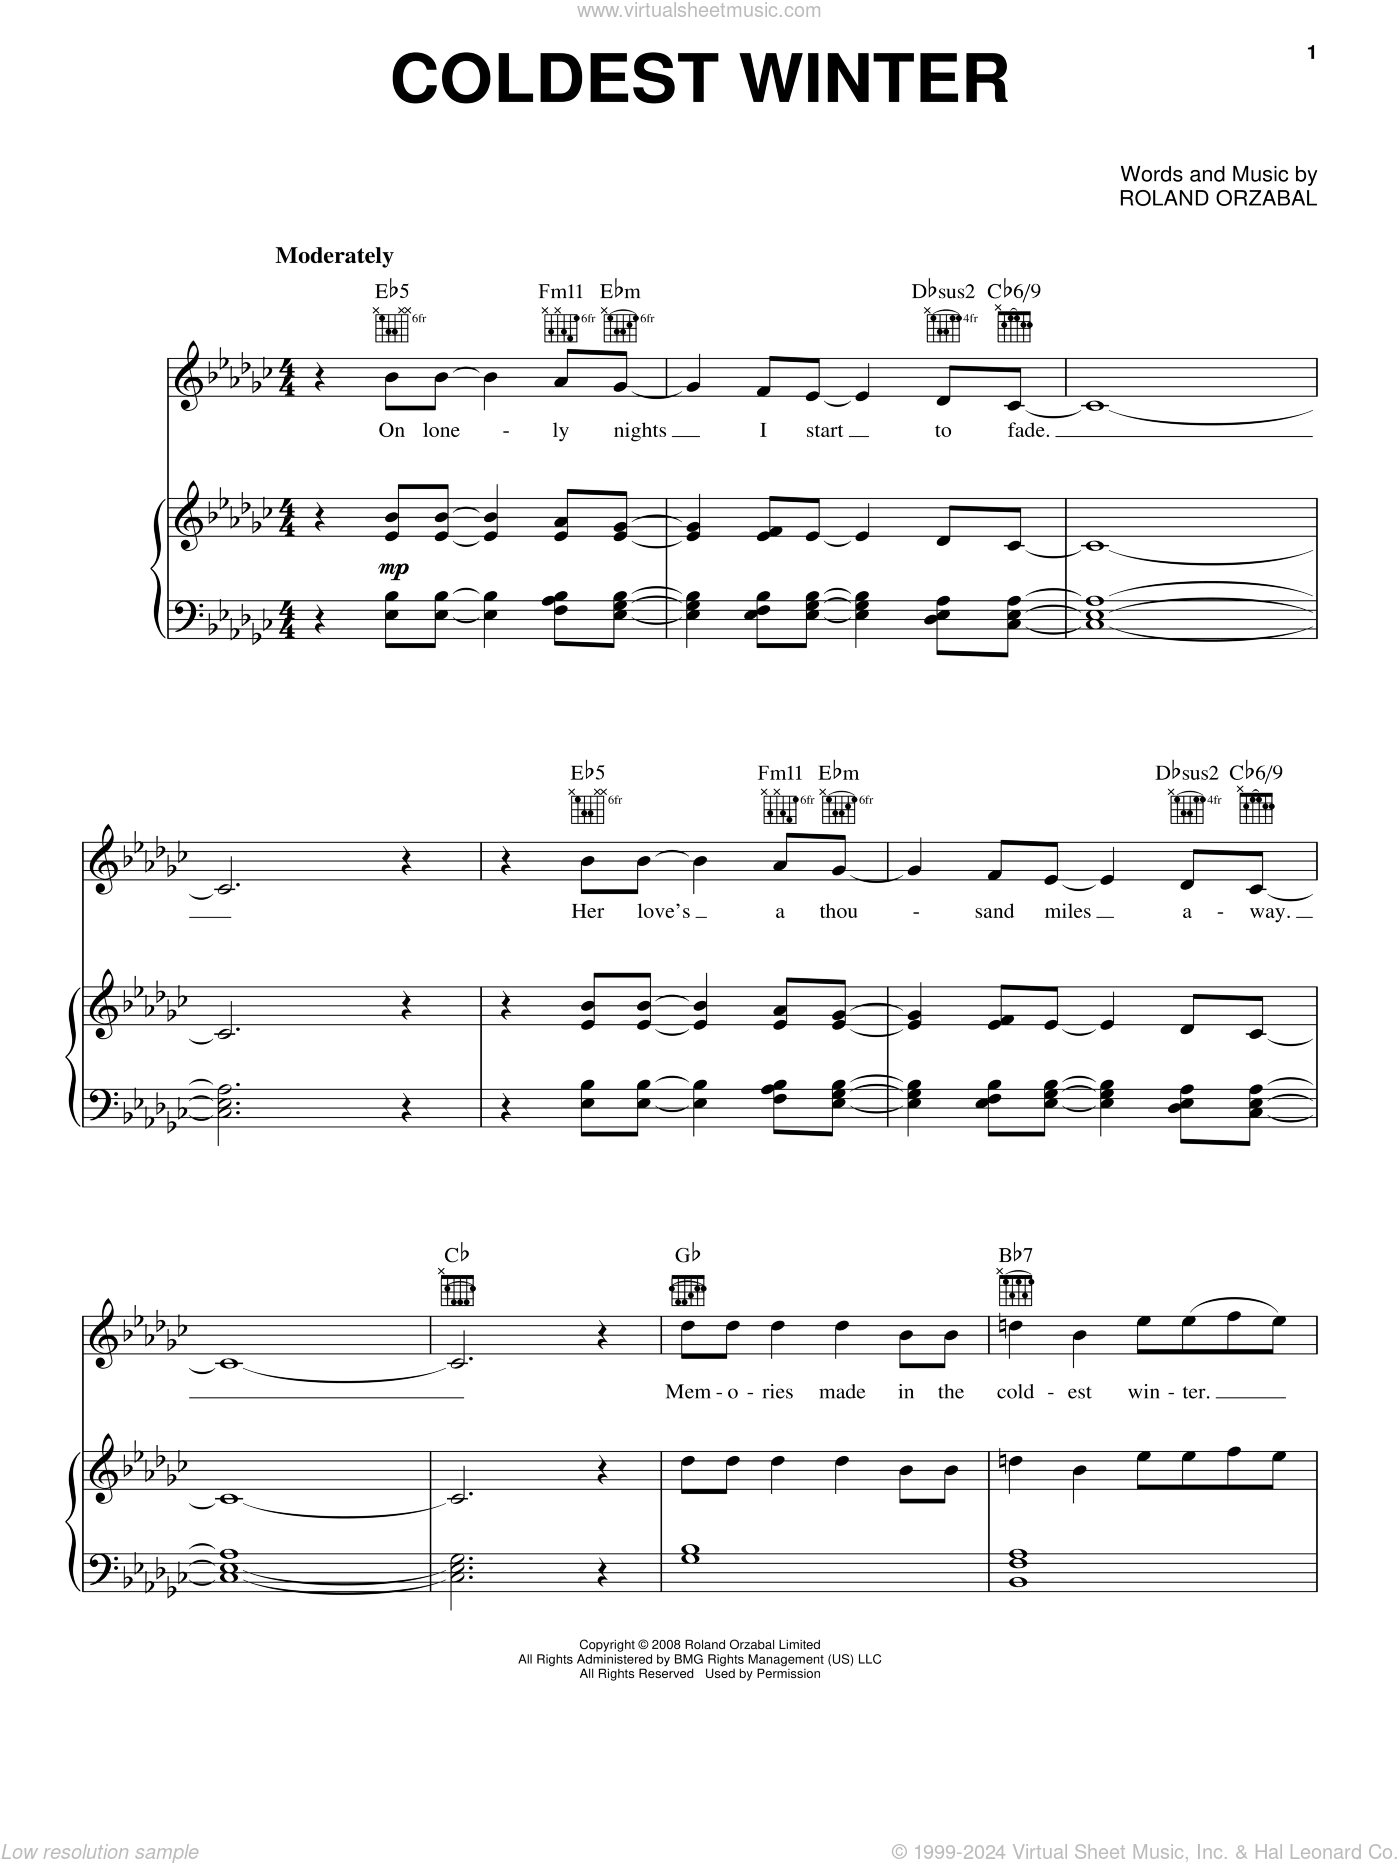 Download Pentatonix - Coldest Winter sheet music for voice, piano or guitar